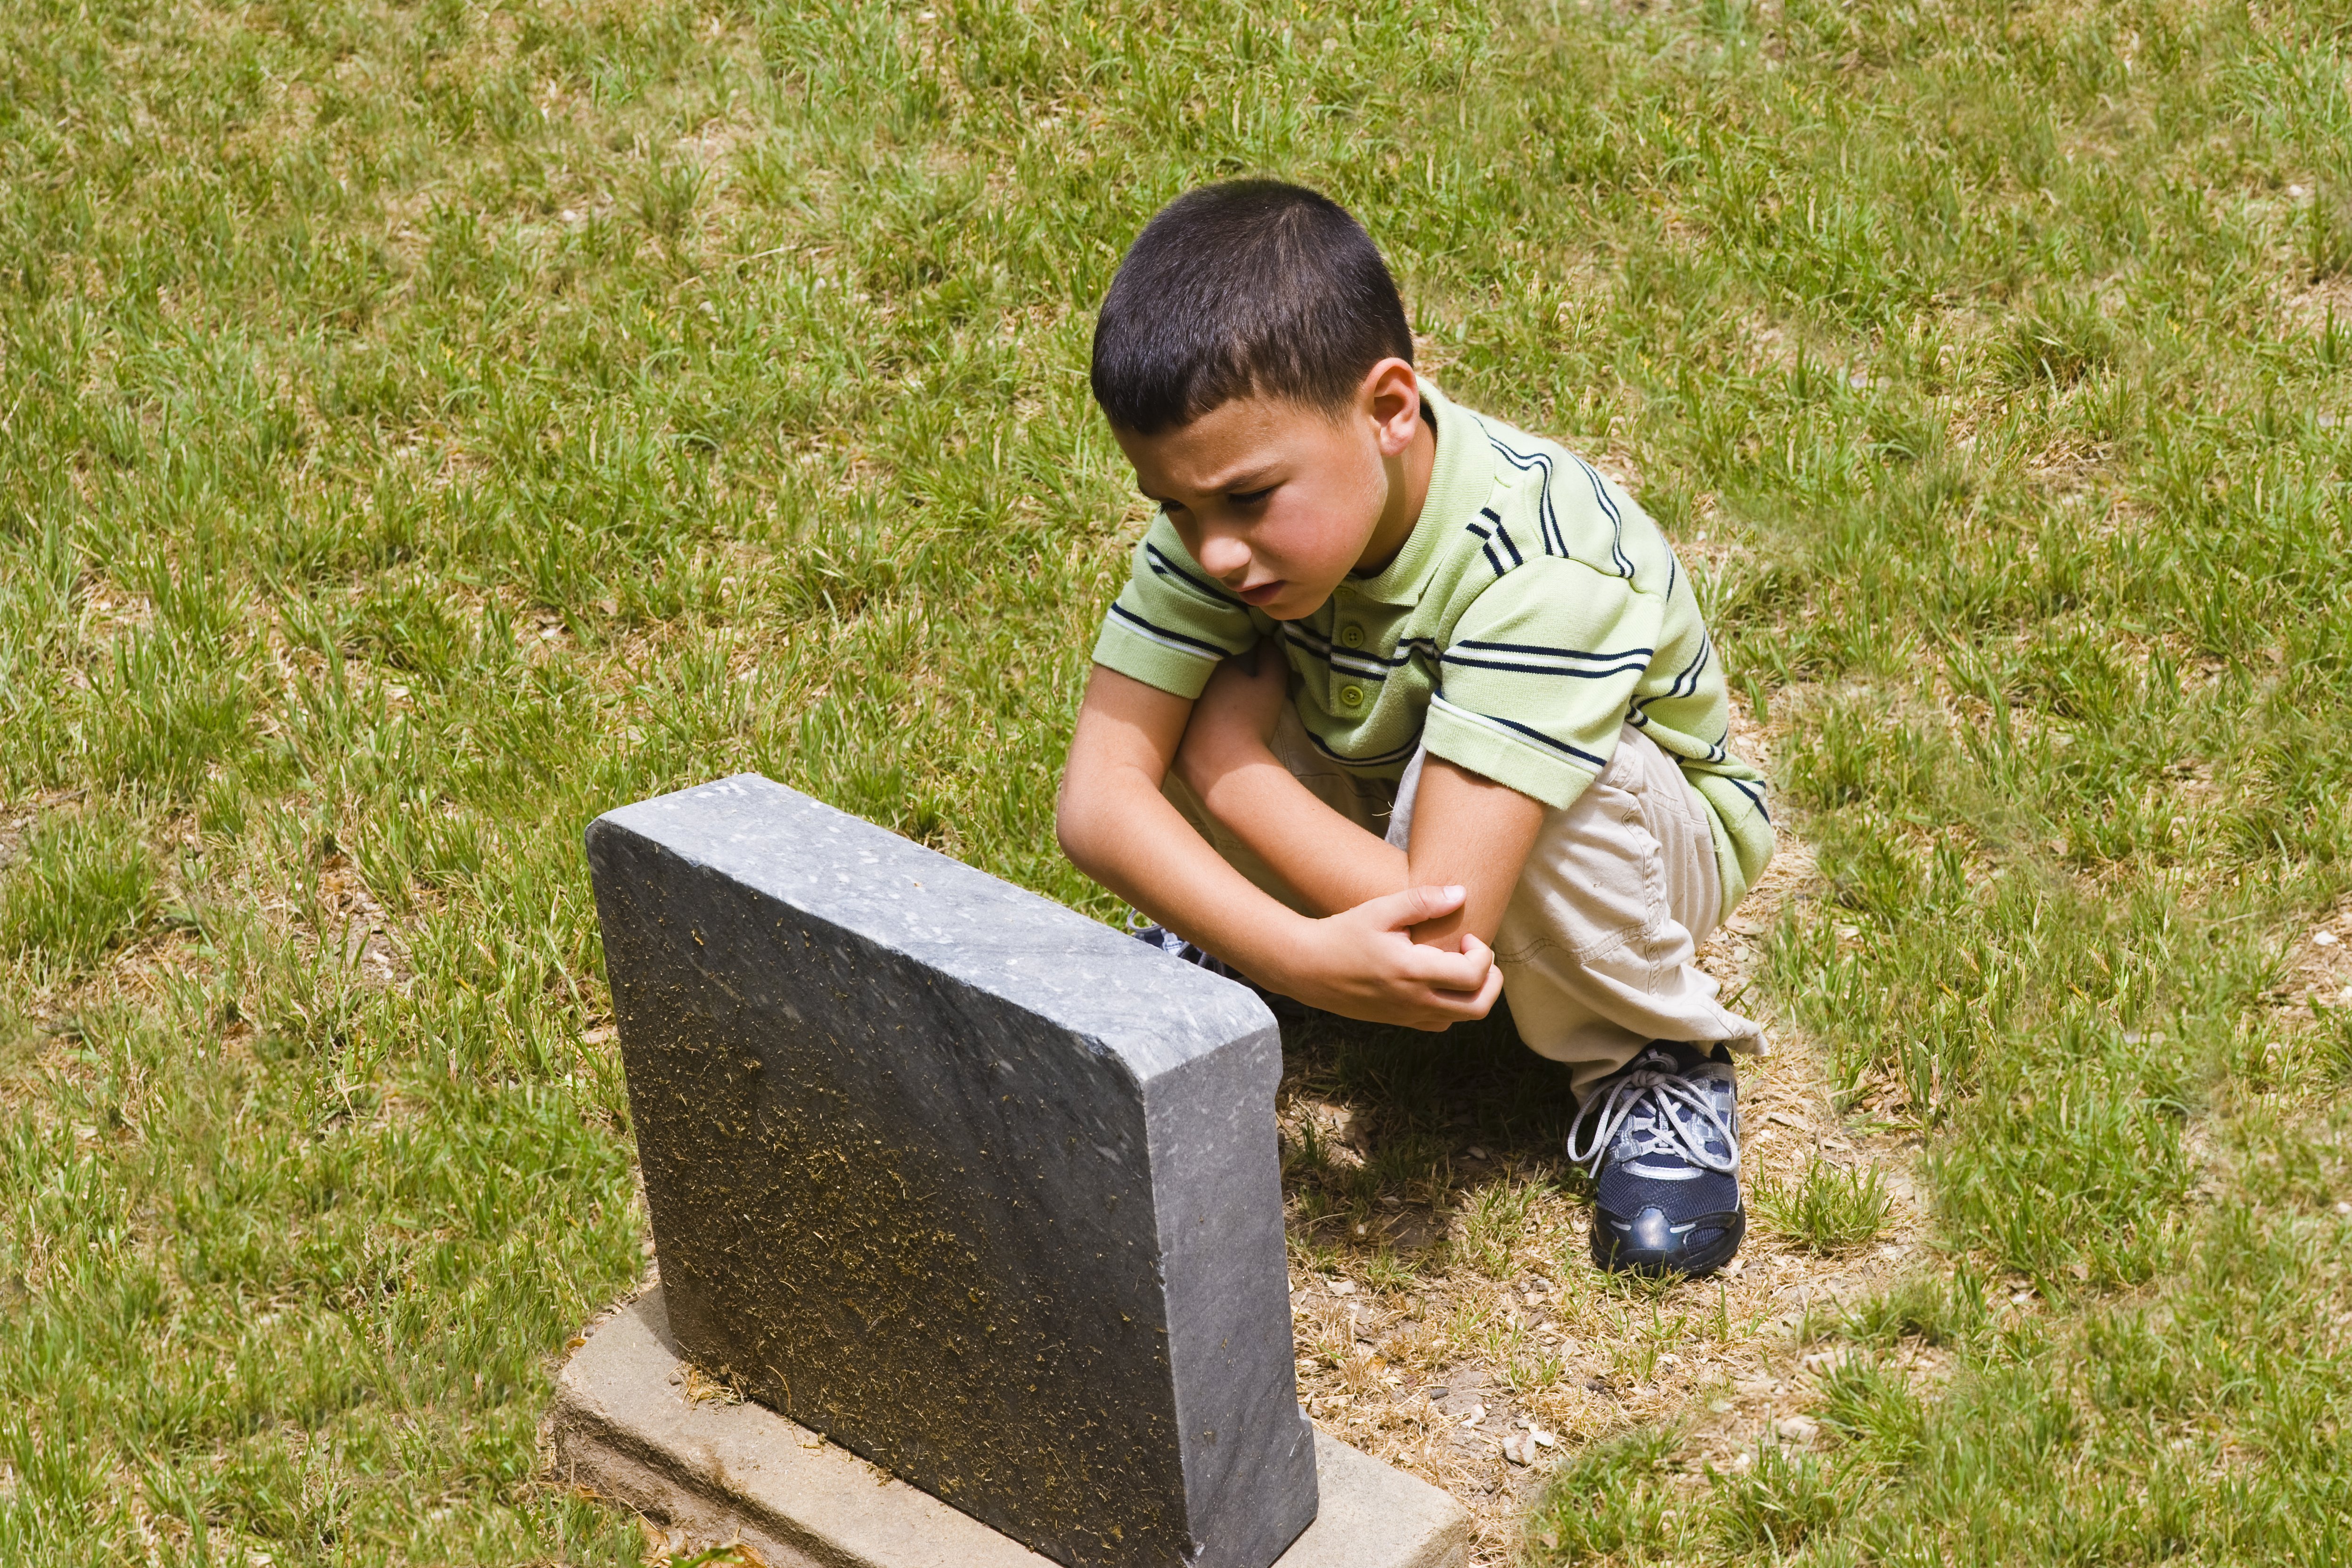 The little boy paid a visit to Martha's grave. | Source: Getty Images